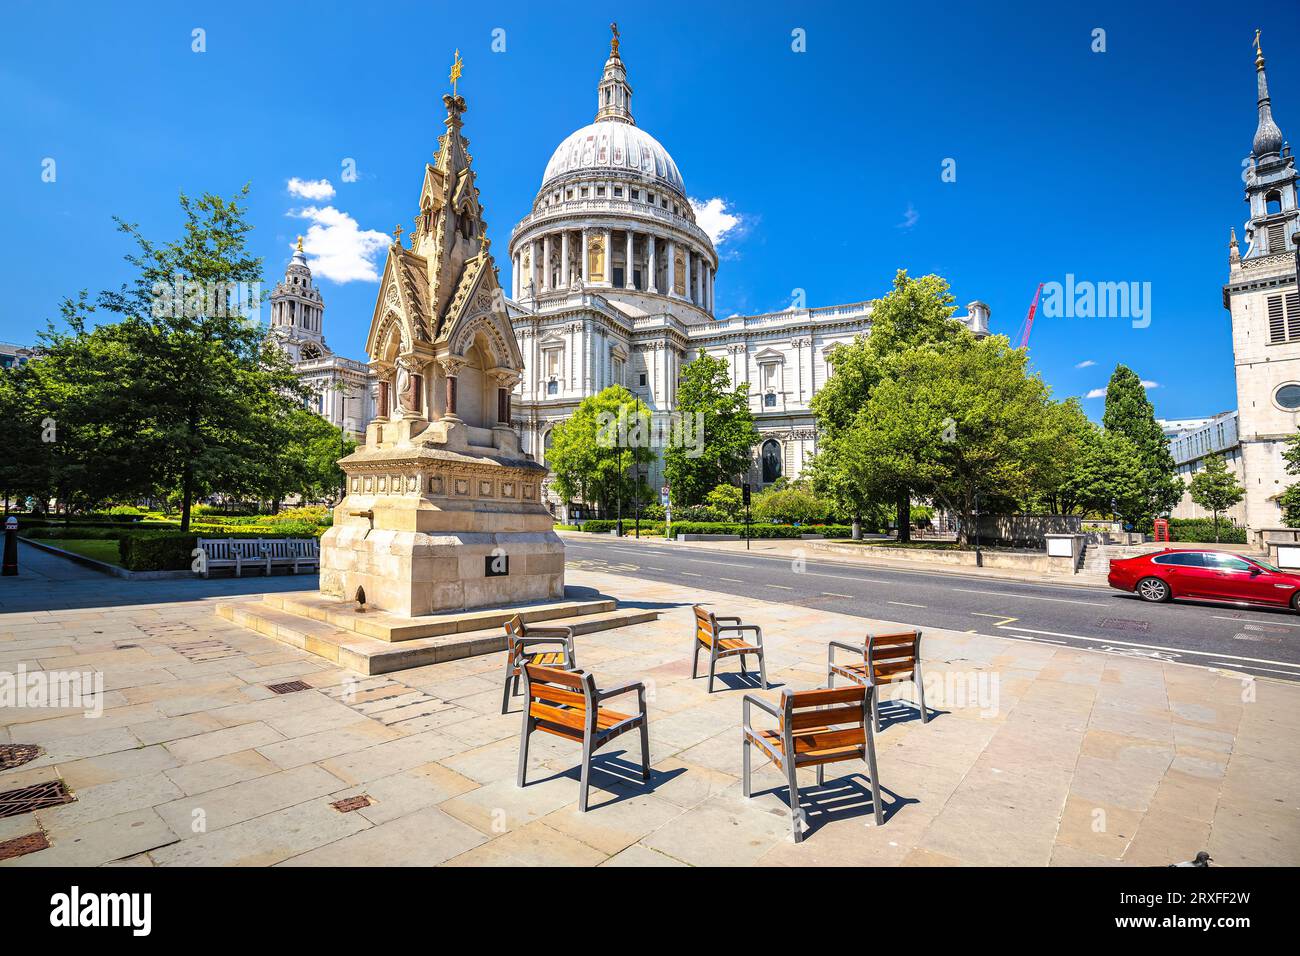 Saint Paul's Cathedral in London street view, capital of UK Stock Photo